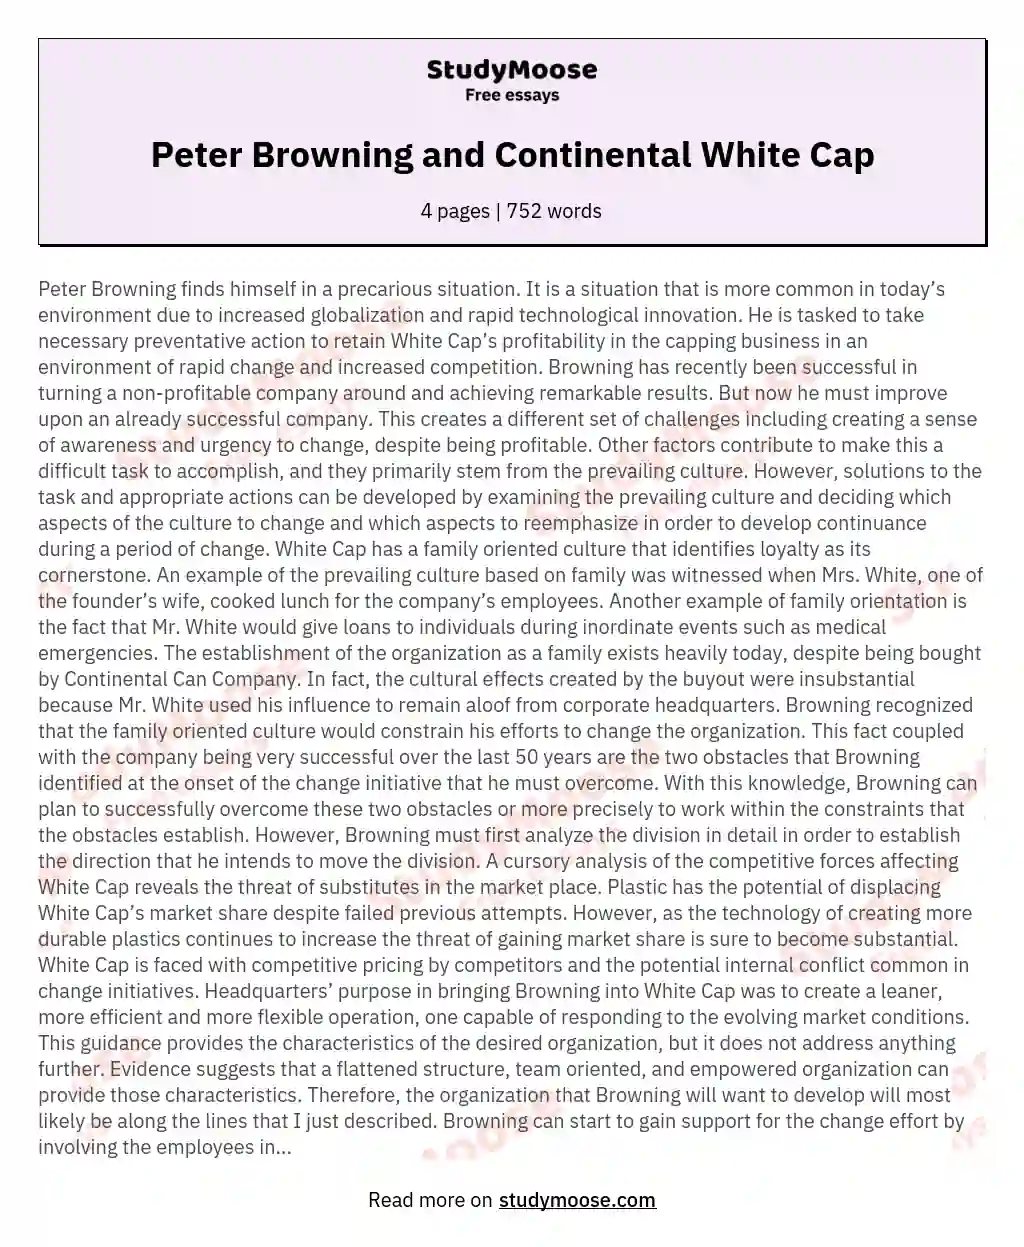 Peter Browning and Continental White Cap essay